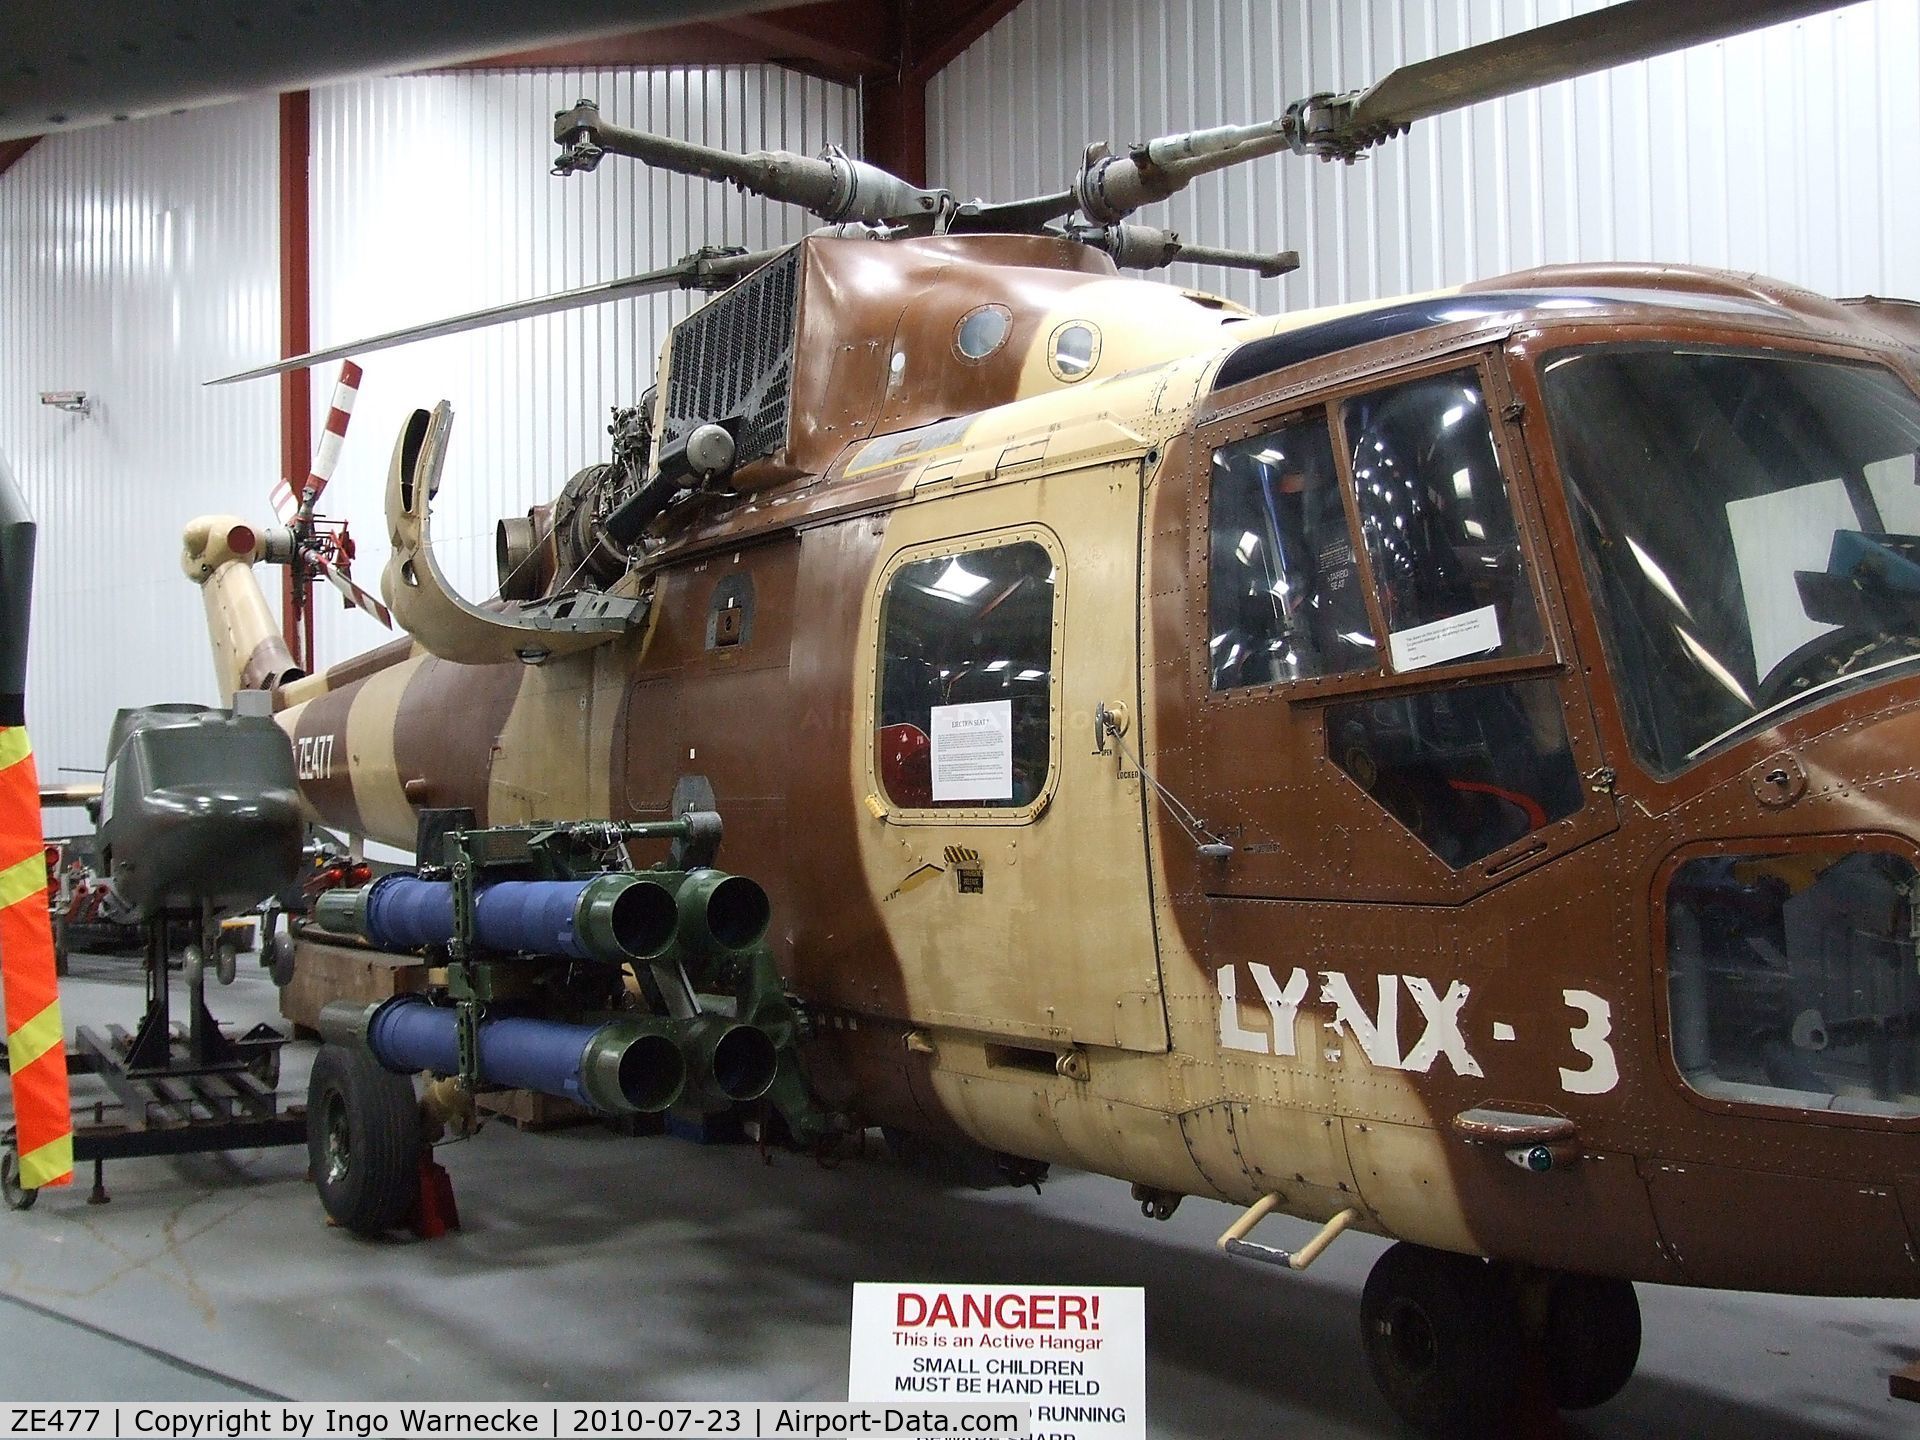 ZE477, 1984 Westland Lynx HAS.3 C/N 310/001P, Westland Lynx 3 prototype at the Helicopter Museum, Weston-super-Mare